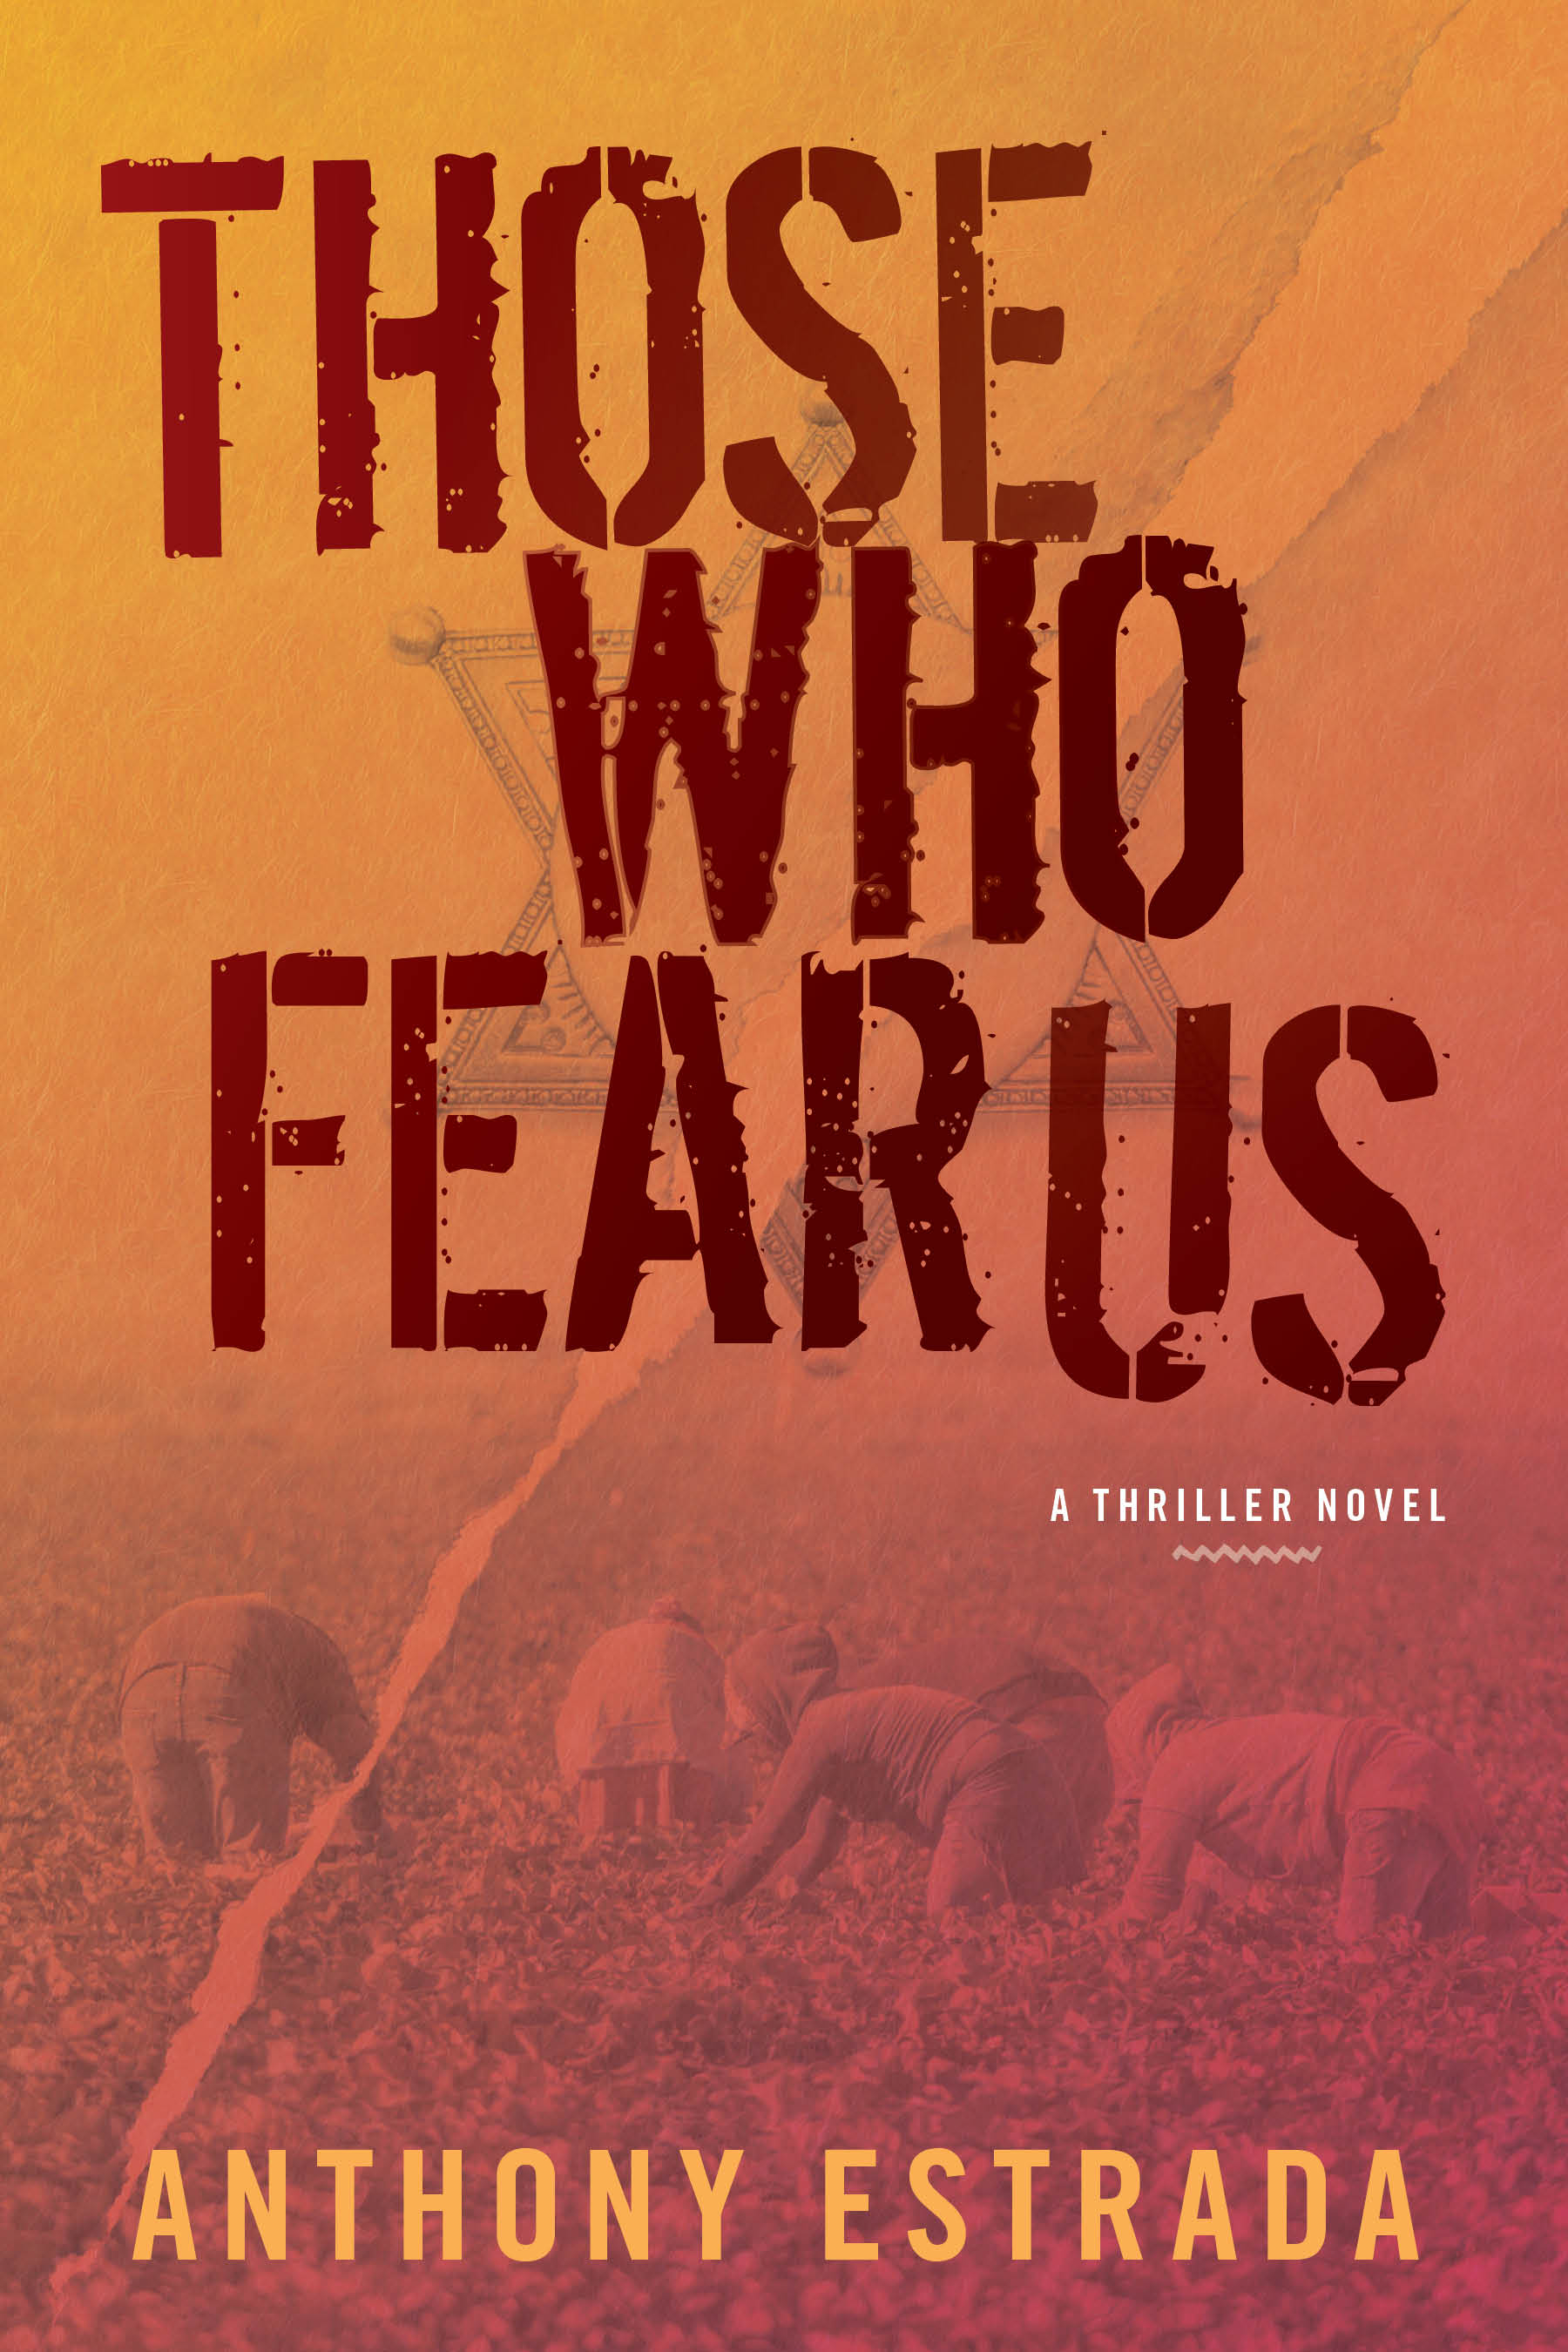 The New Book "Those Who Fear Us" by Anthony Estrada Explores Identity, Redemption, and the Power of Truth